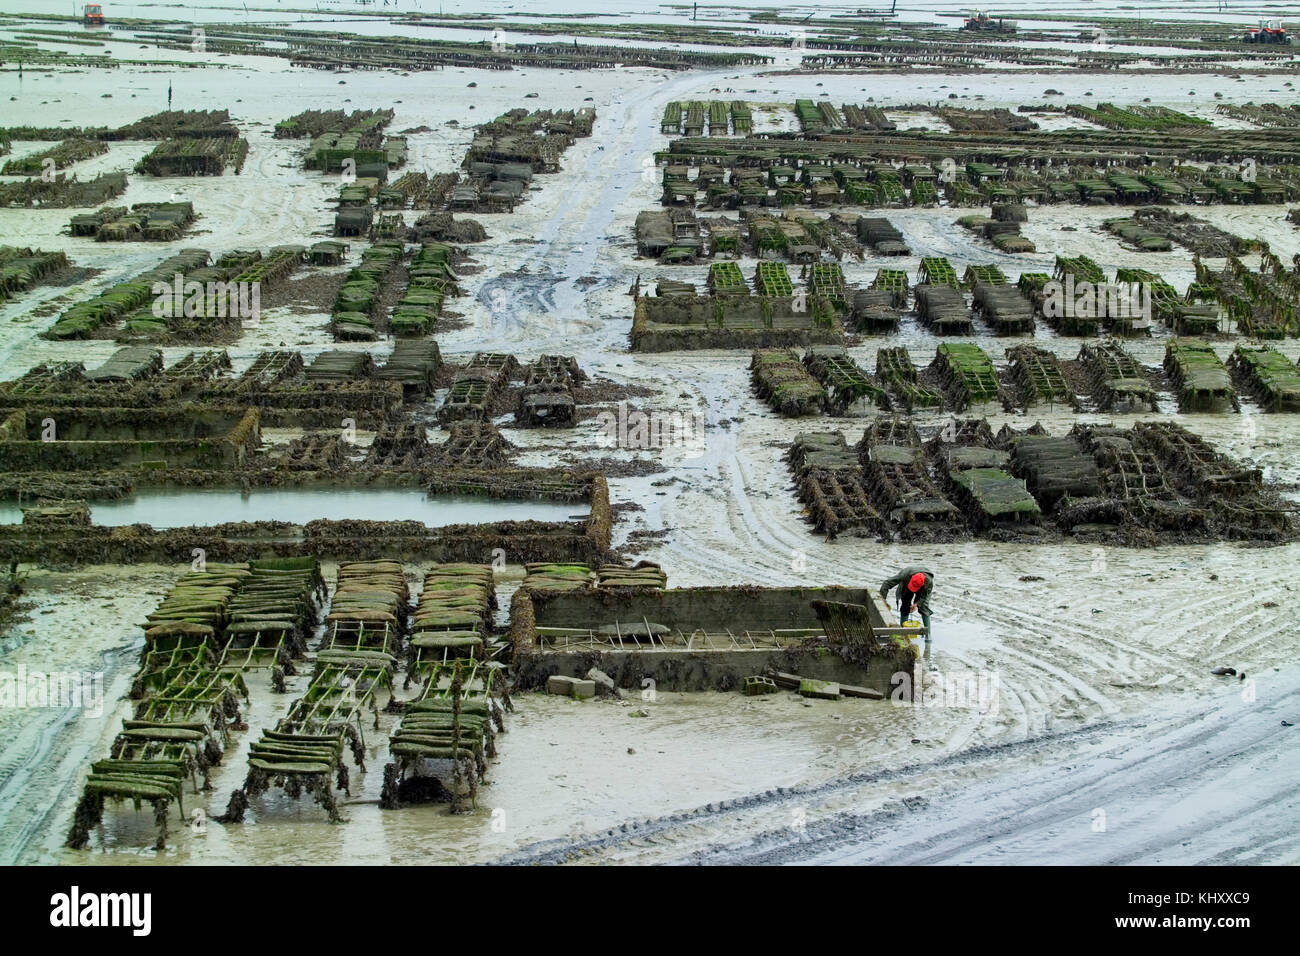 Worker tending rows of oyster beds on beach mudflats, Saint-Malo, Brittany, France Stock Photo